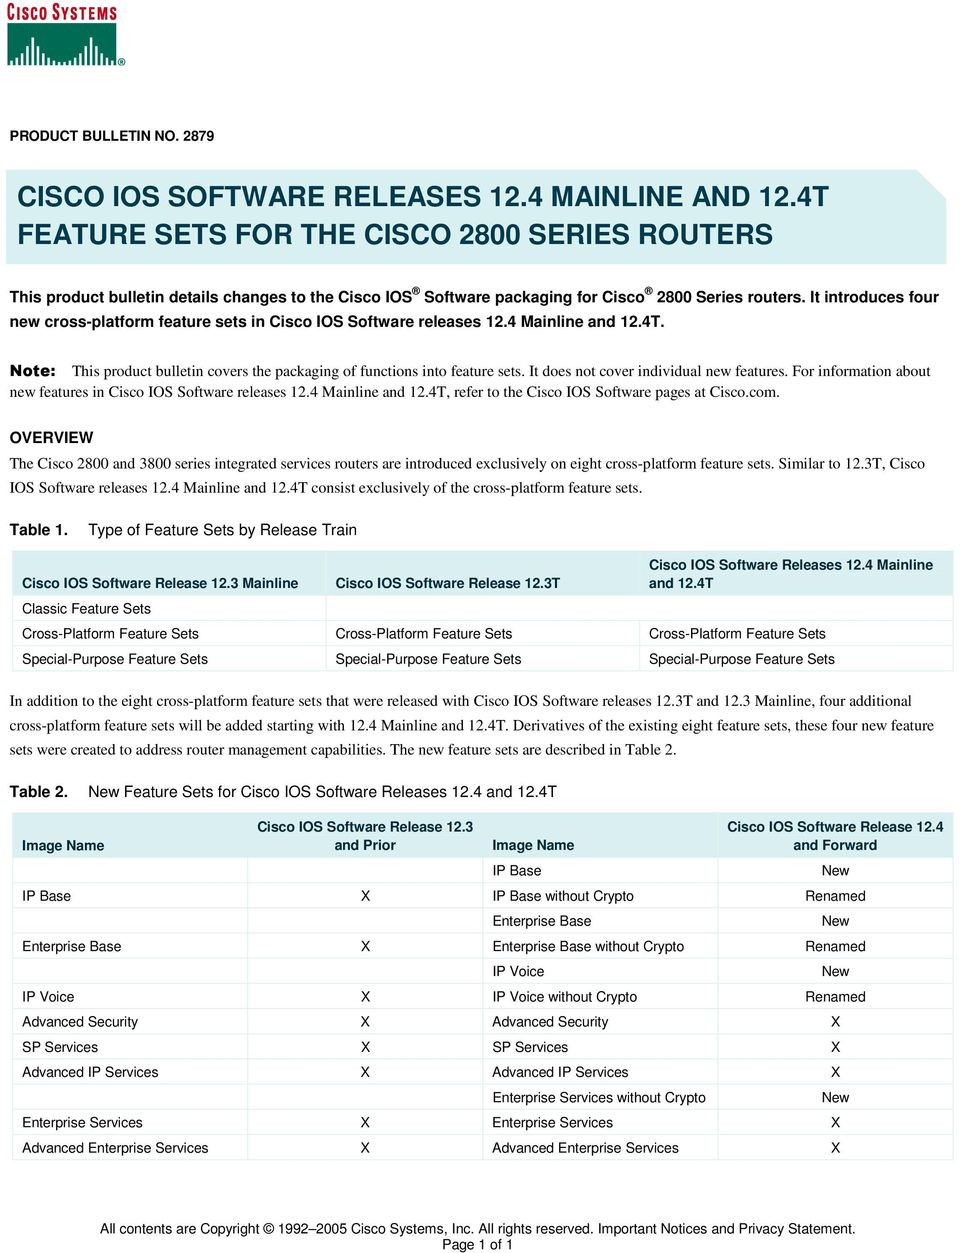 It introduces four new cross-platform feature sets in Cisco IOS Software releases 12.4 Mainline and. This product bulletin covers the packaging of functions into feature sets.